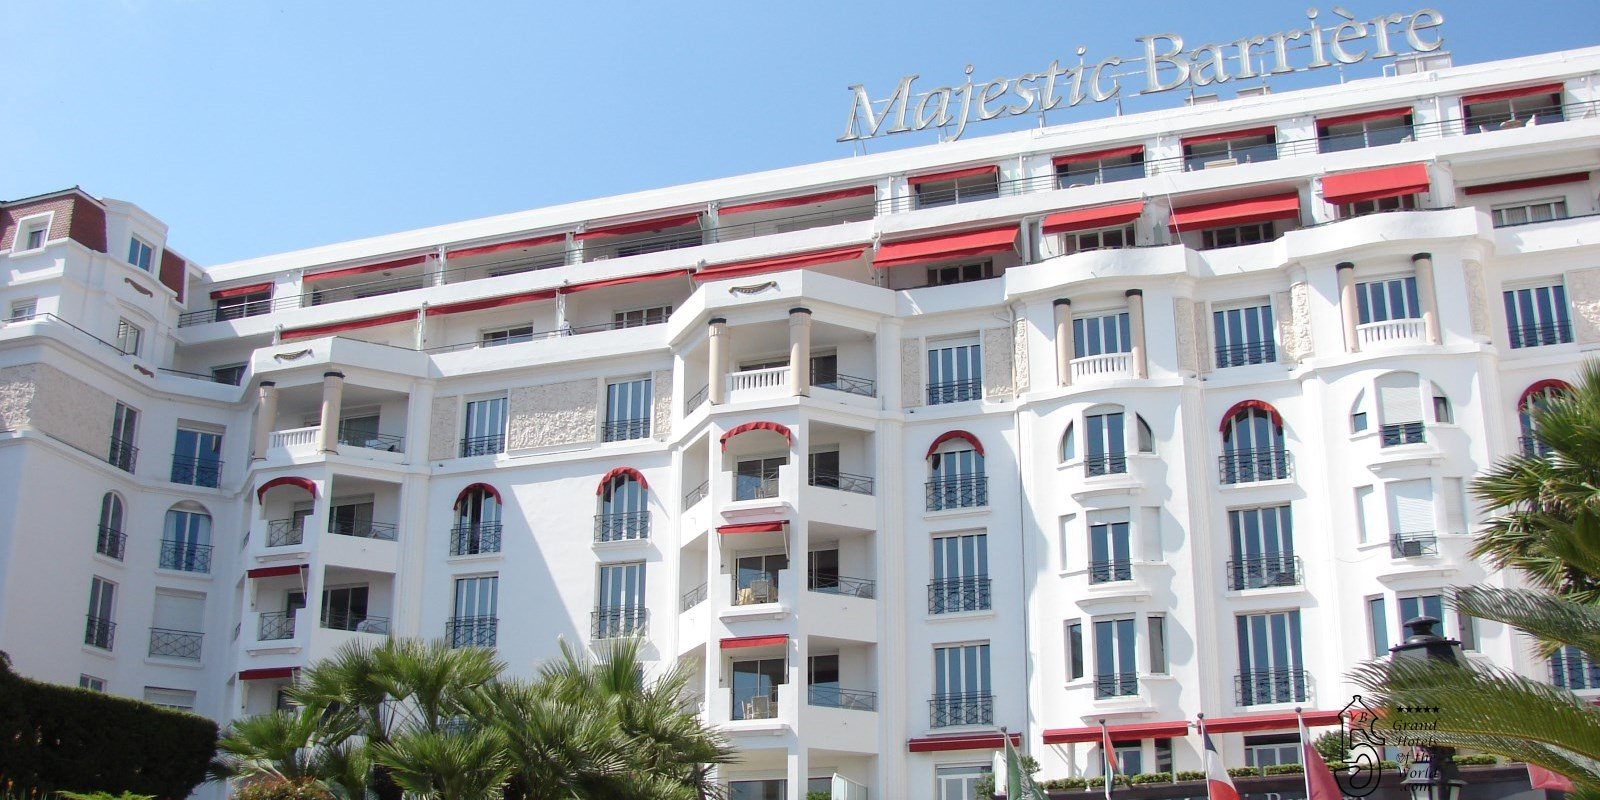 Hotel Majestic in Cannes